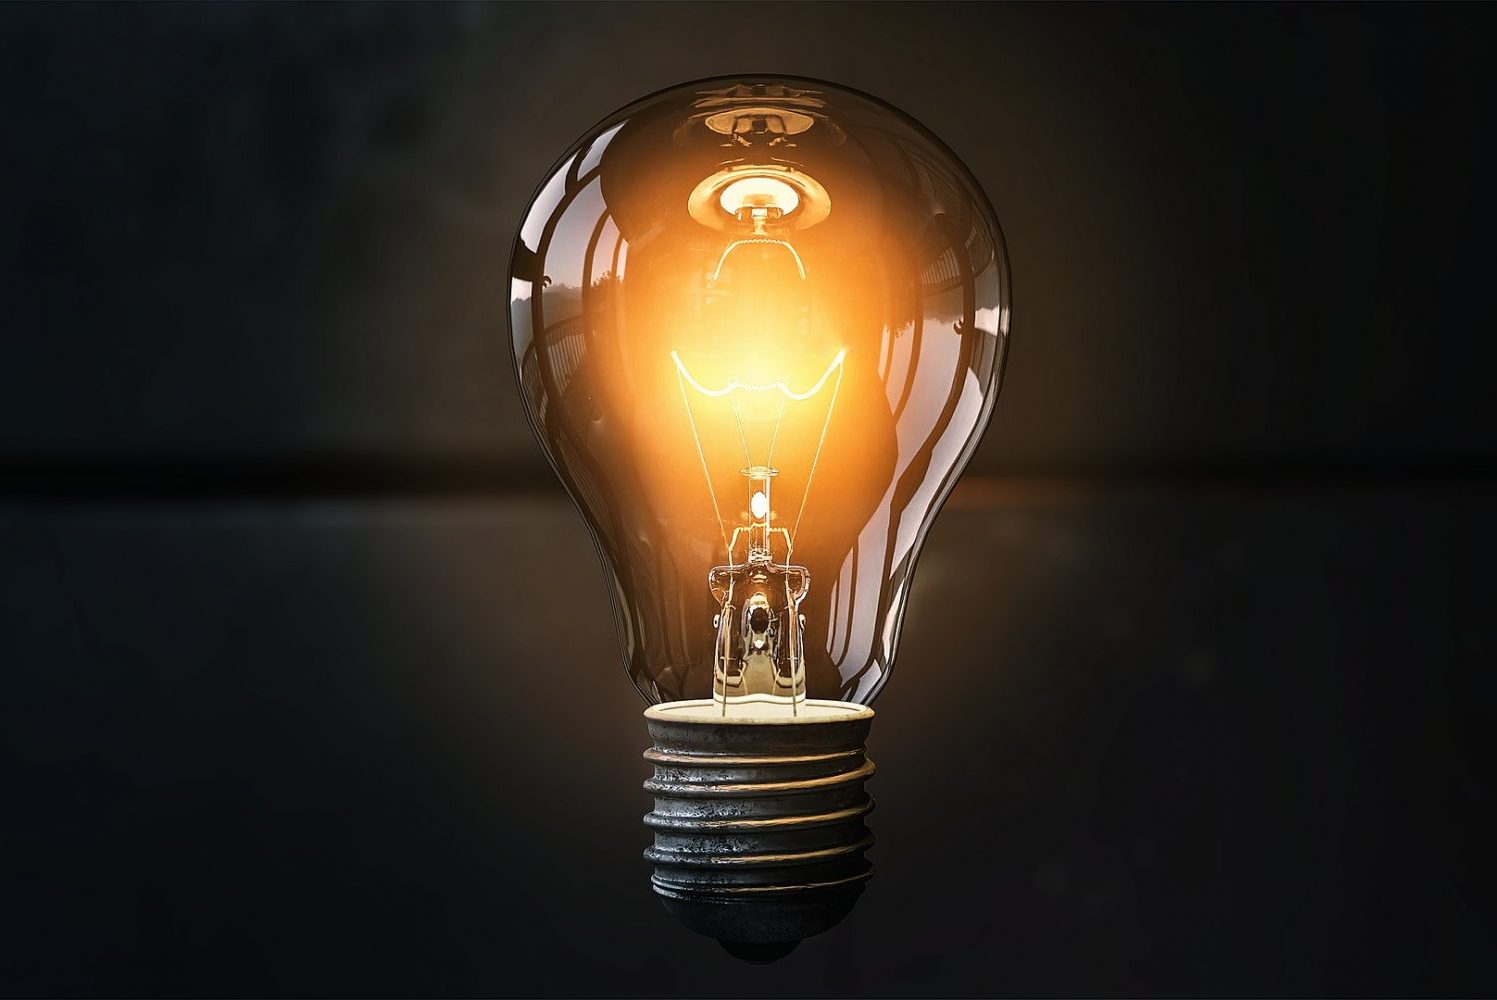 in an article about marketing an invention, a photo of a lit lightbulb